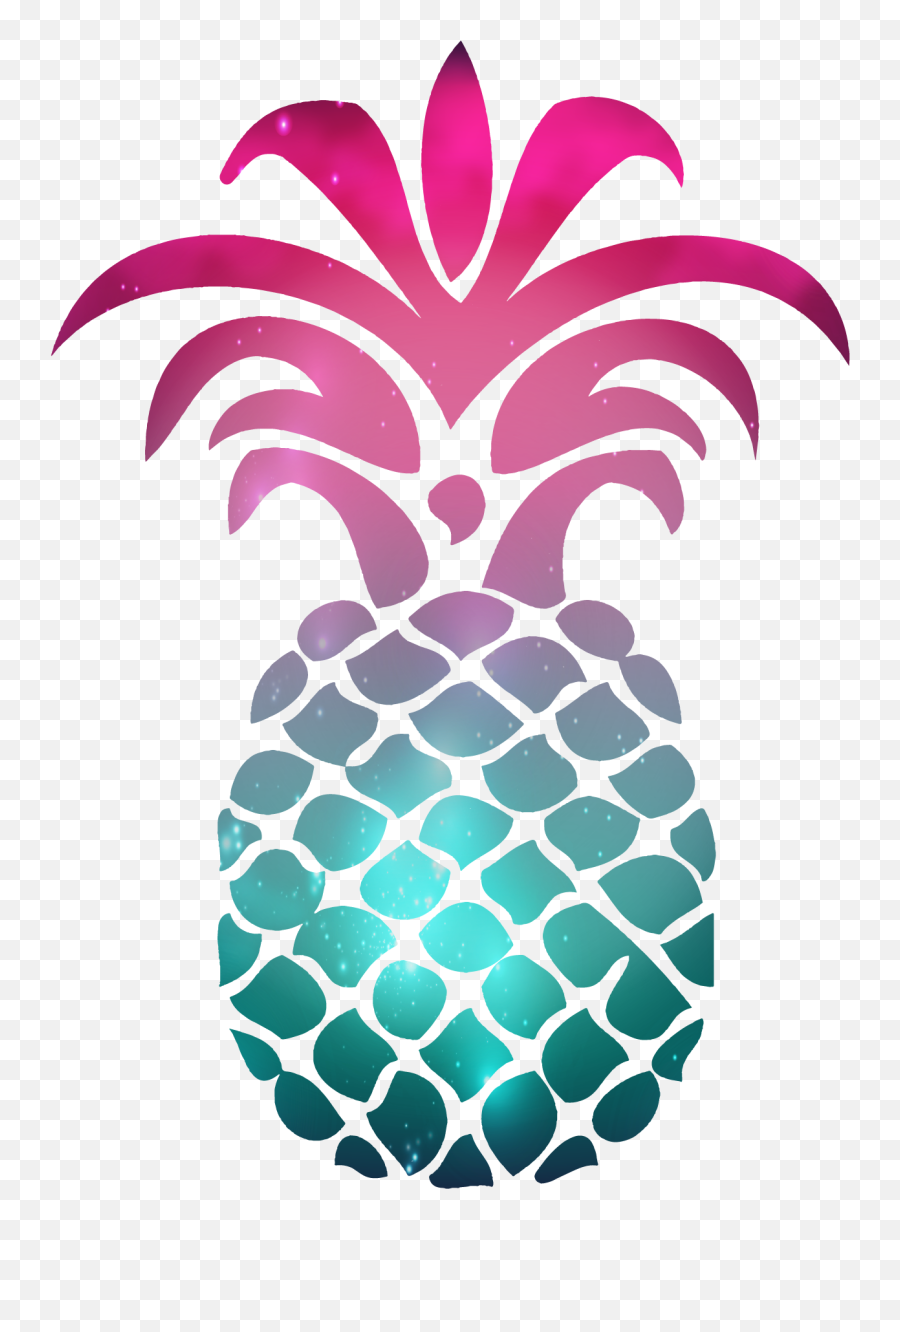 How To Crochet A Textured Scarf - Free Pattern U2022 A Plush Pineapple Vector Svg Emoji,Fruit Of The Spirit Emojis